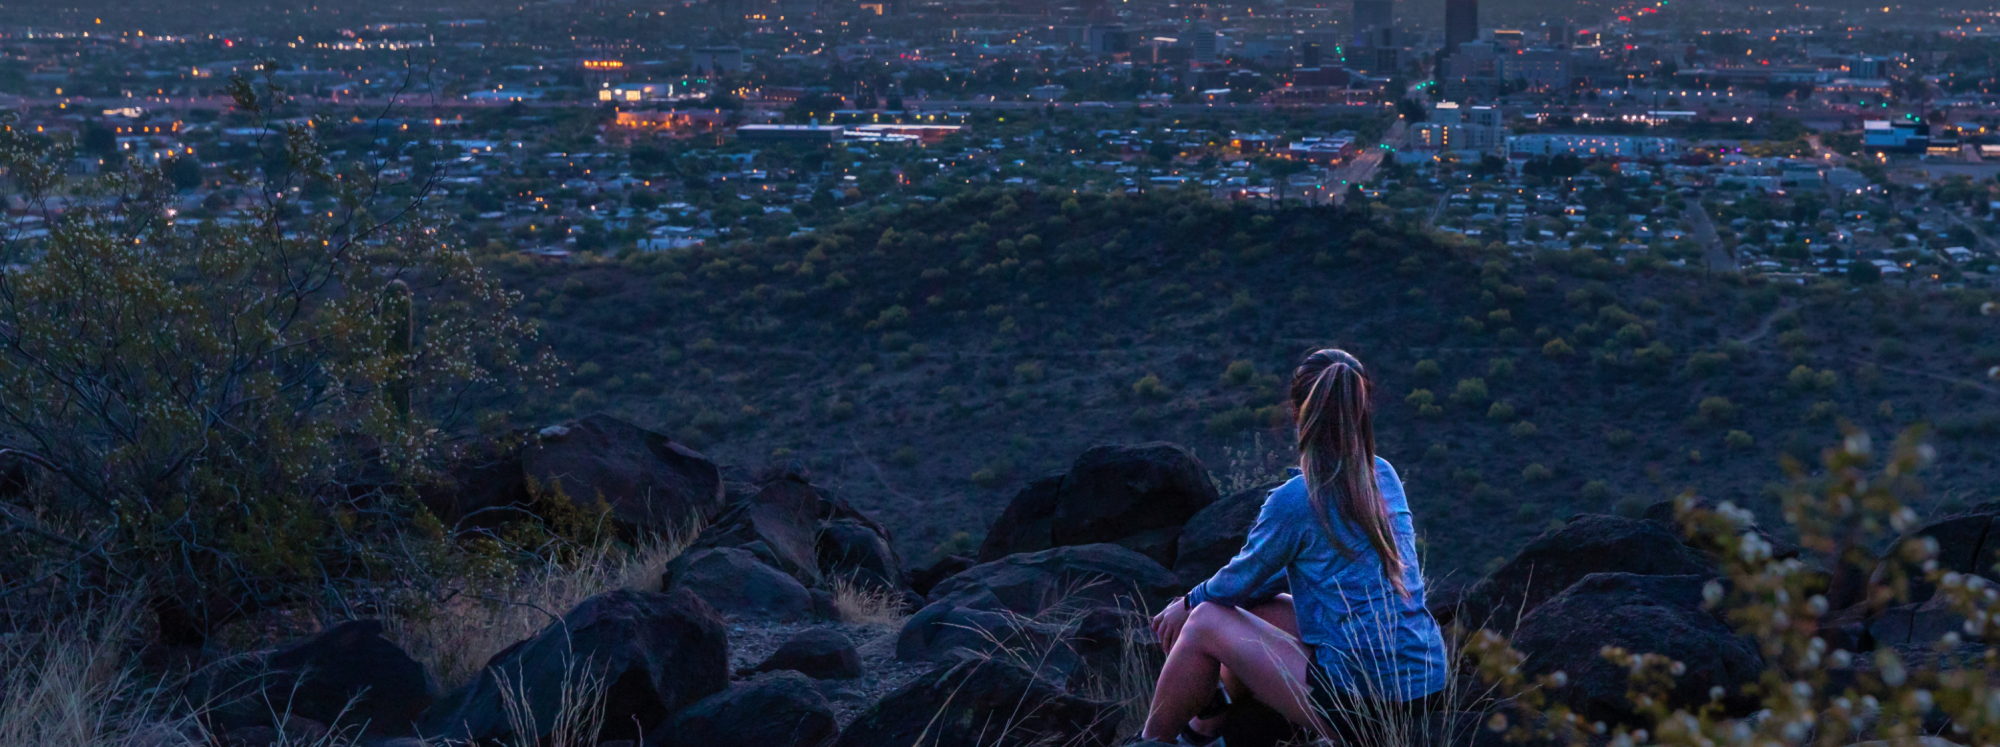 A woman in athlesure clothing sits on Tumamoc Hill looking out over the city of Tucson at dusk